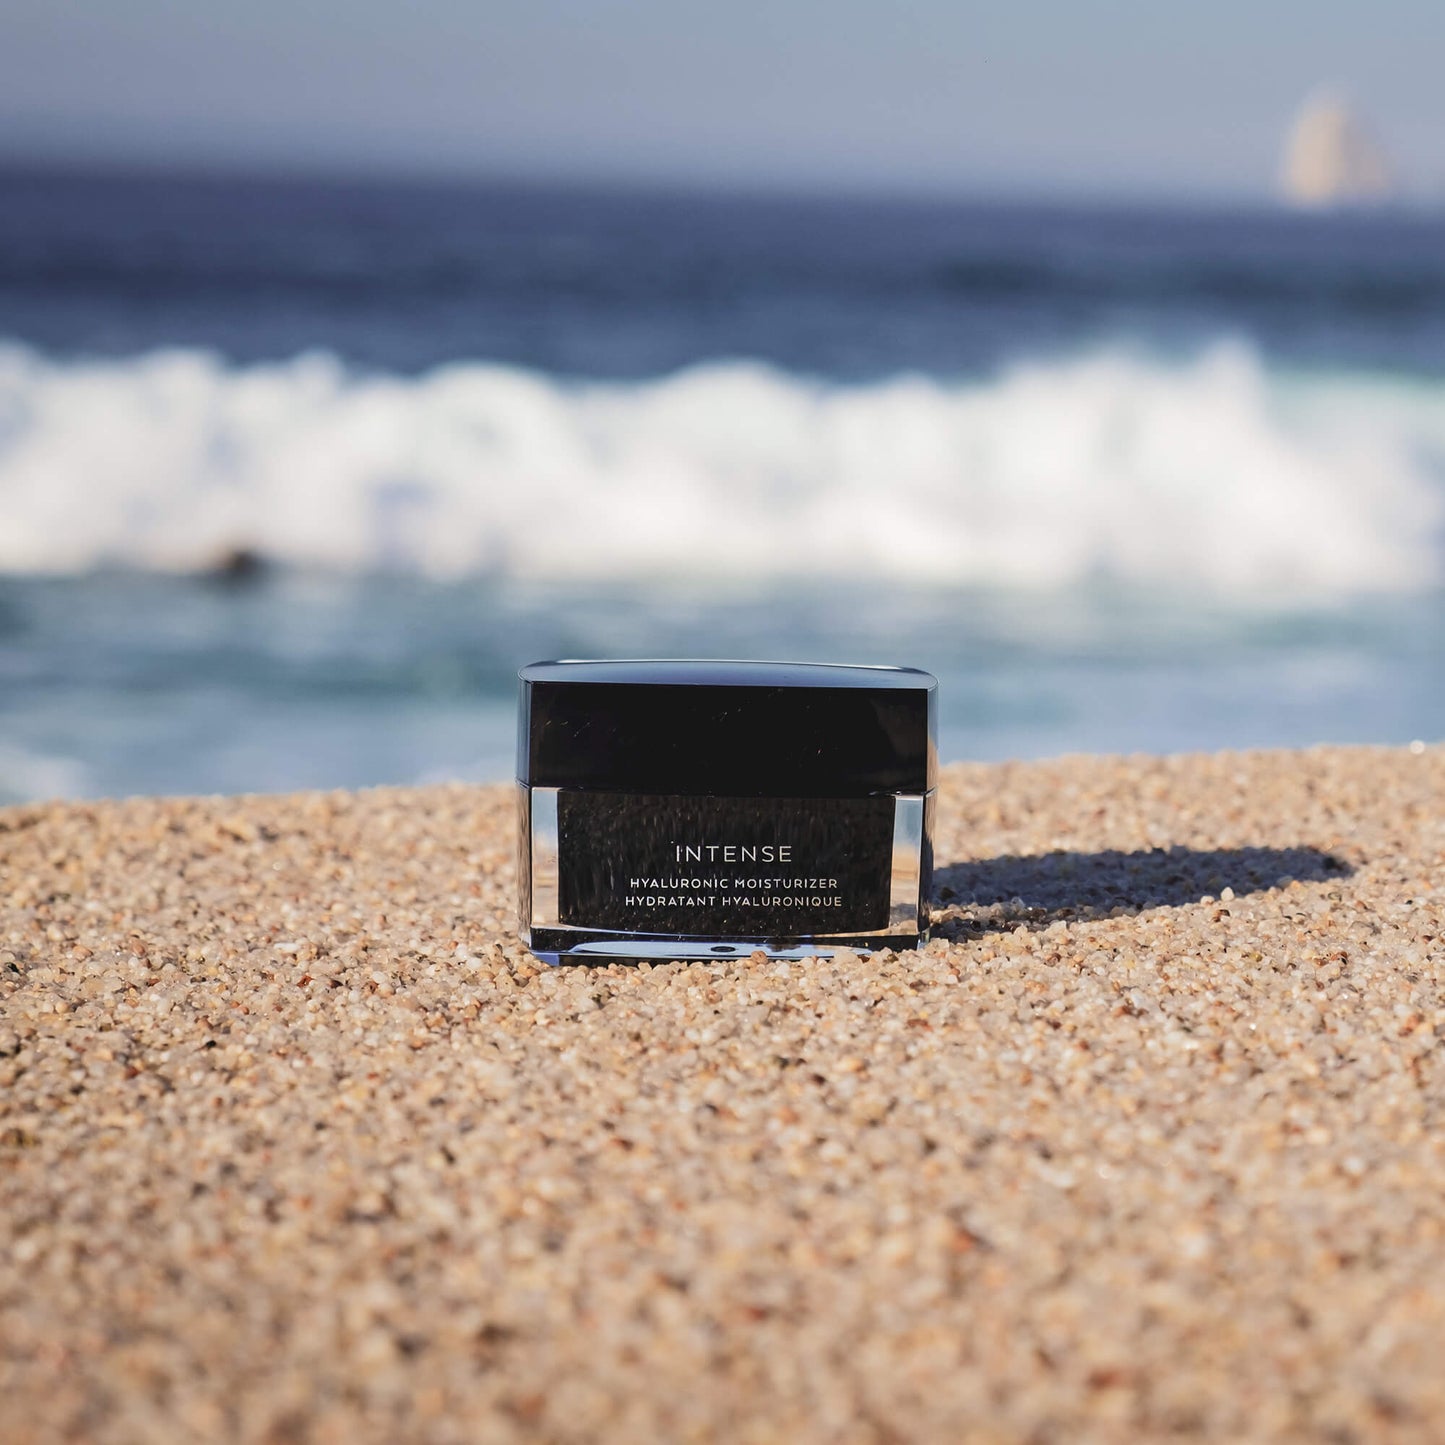 A jar of hyaluronic moisturizer, black in color, placed on sandy beach with the ocean in the background.